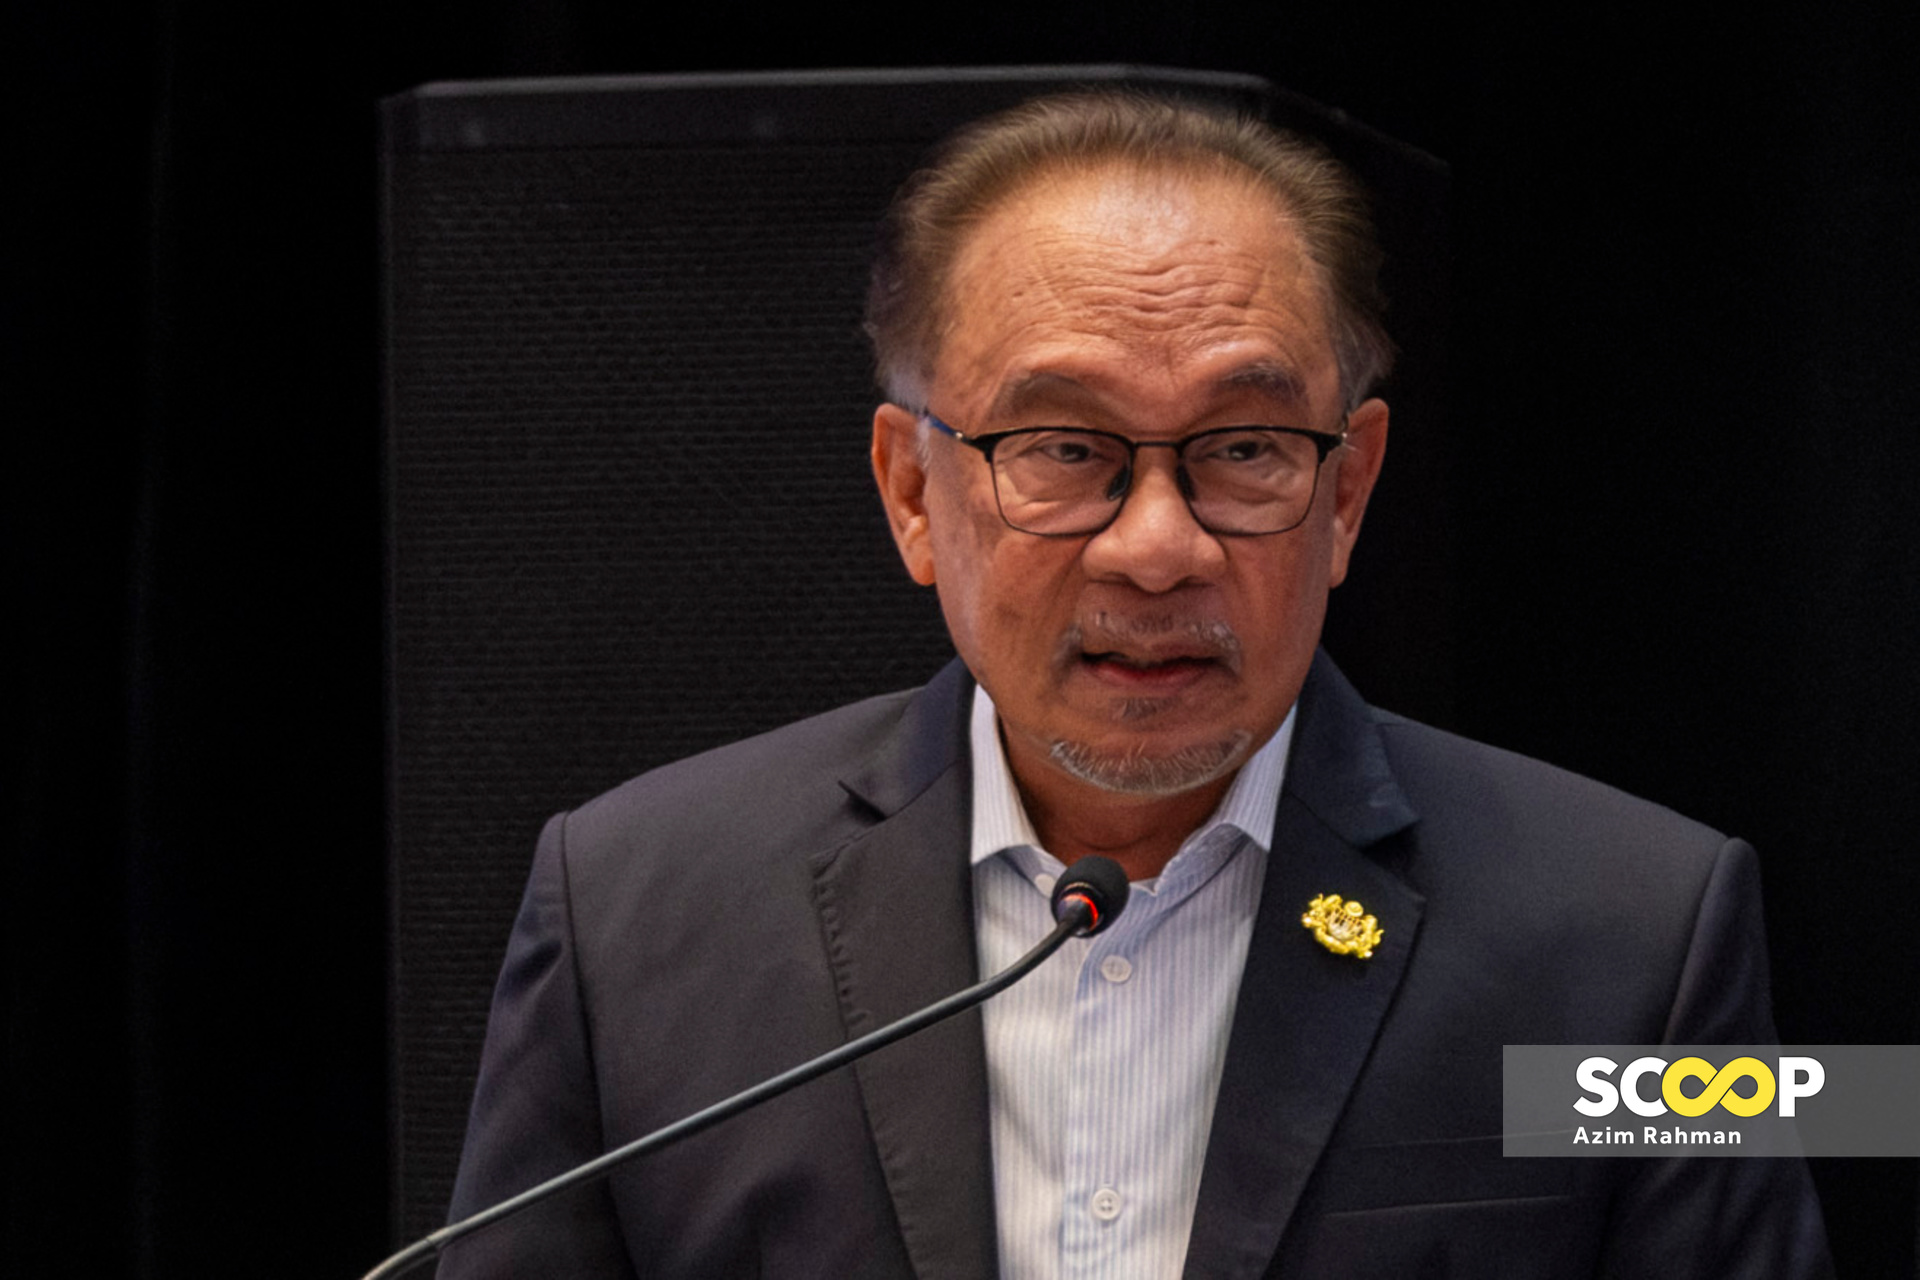 Anwar announces ICPT surcharge cut to ease goods prices